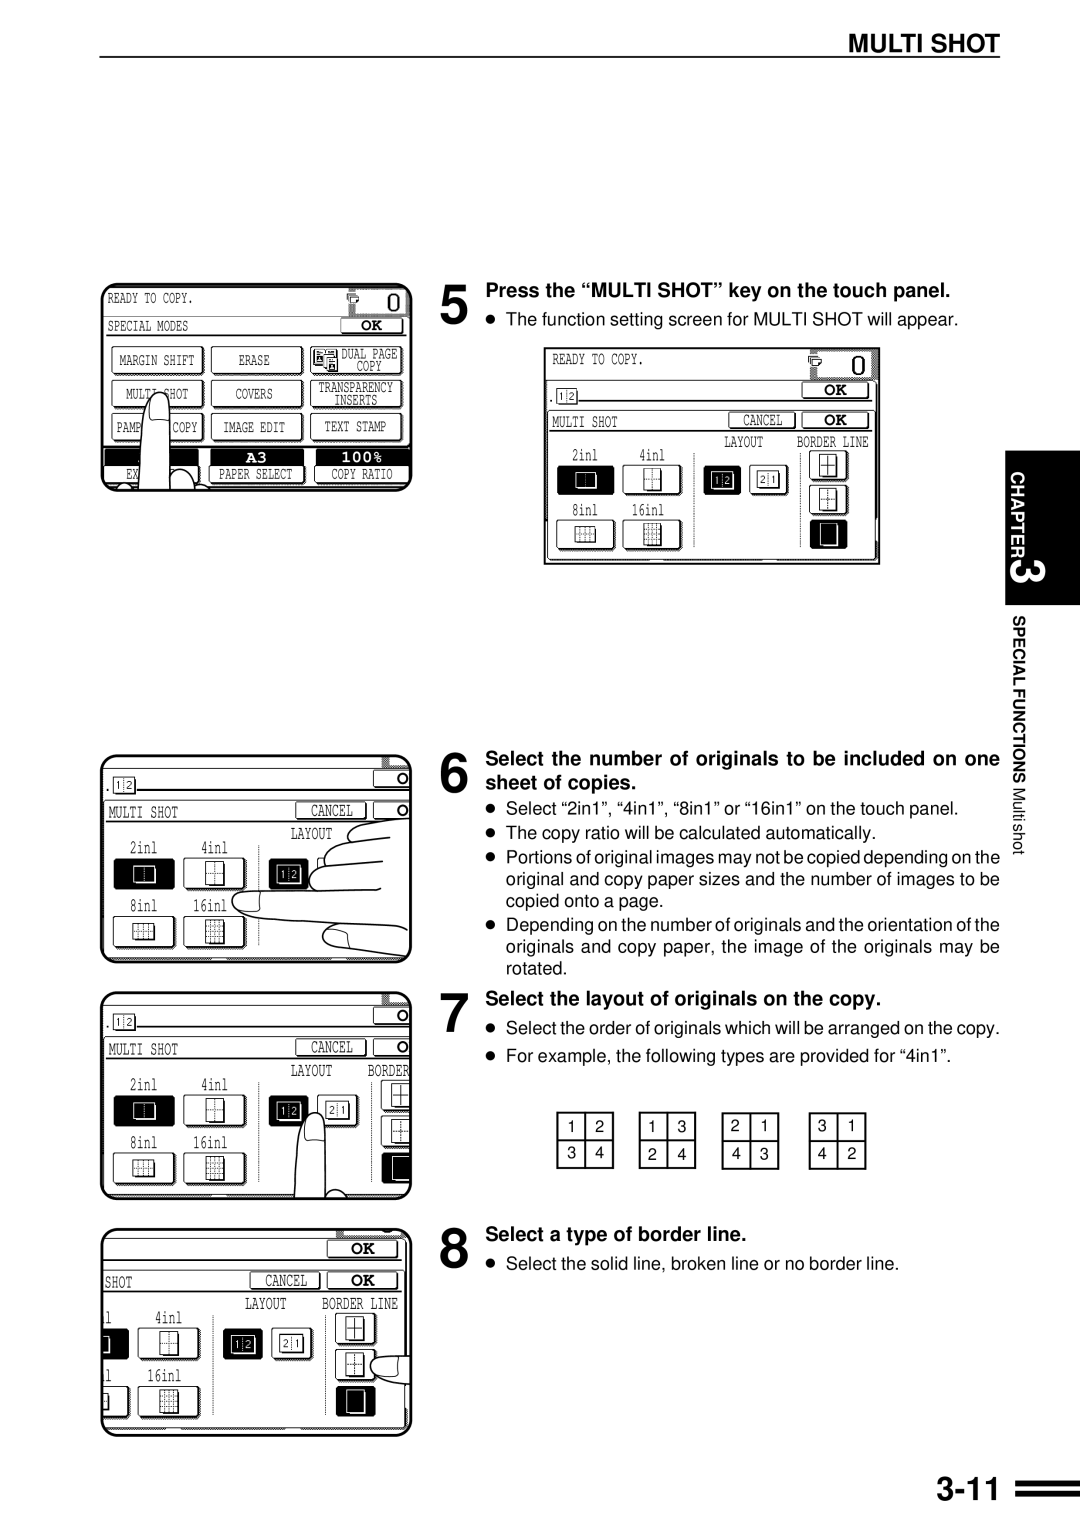 Sharp AR-507 operation manual 3-11, Multi Shot, Press the “MULTI SHOT” key on the touch panel, sheet of copies 